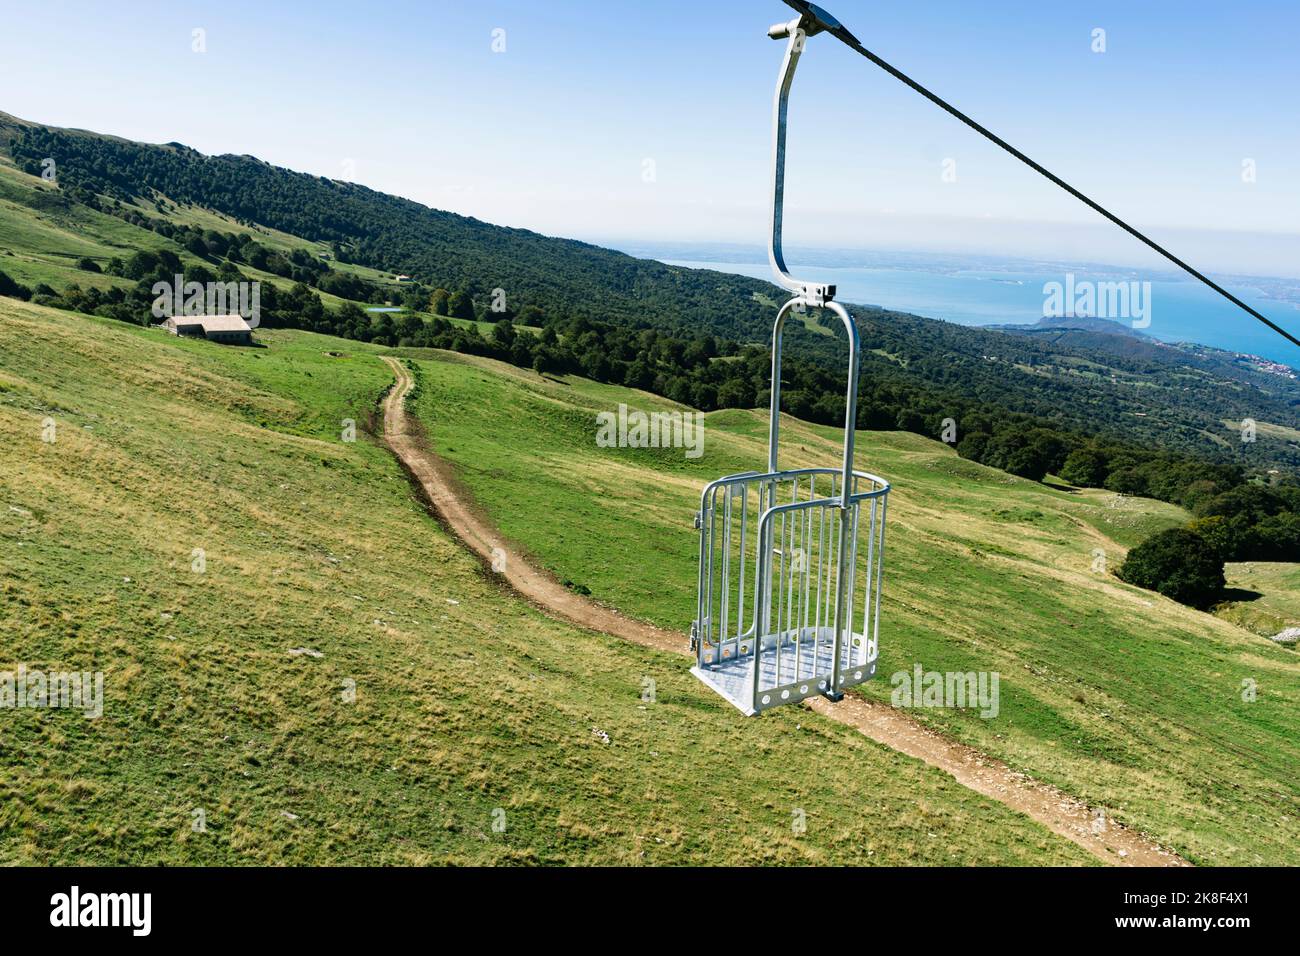 Ski lift hanging from cable at Monte Baldo Stock Photo